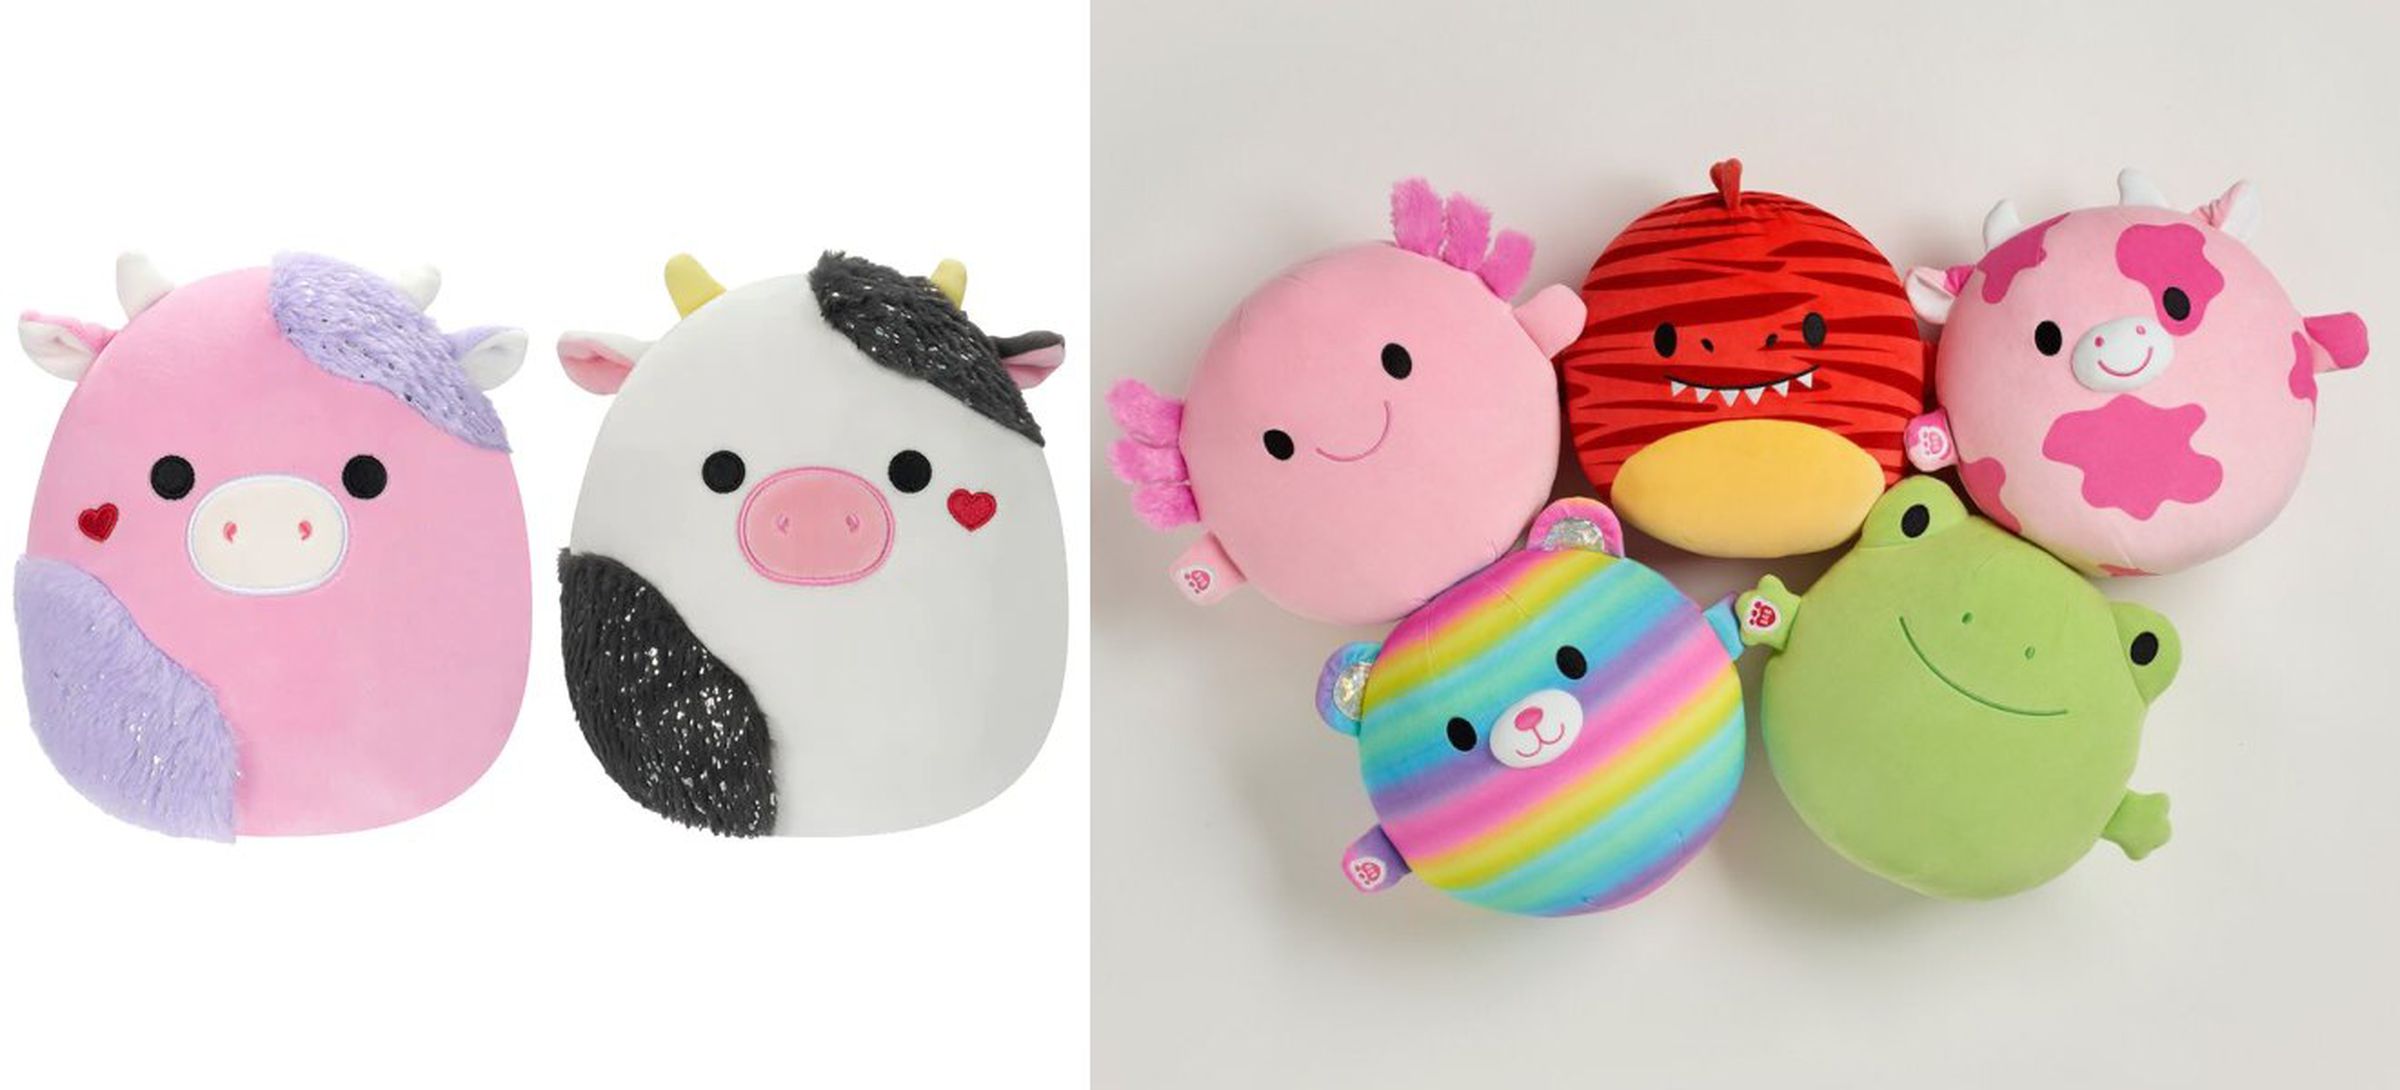 Side by side image showing two Squishmallows plush toys on the left and five plush Skoosherz toys on the right.